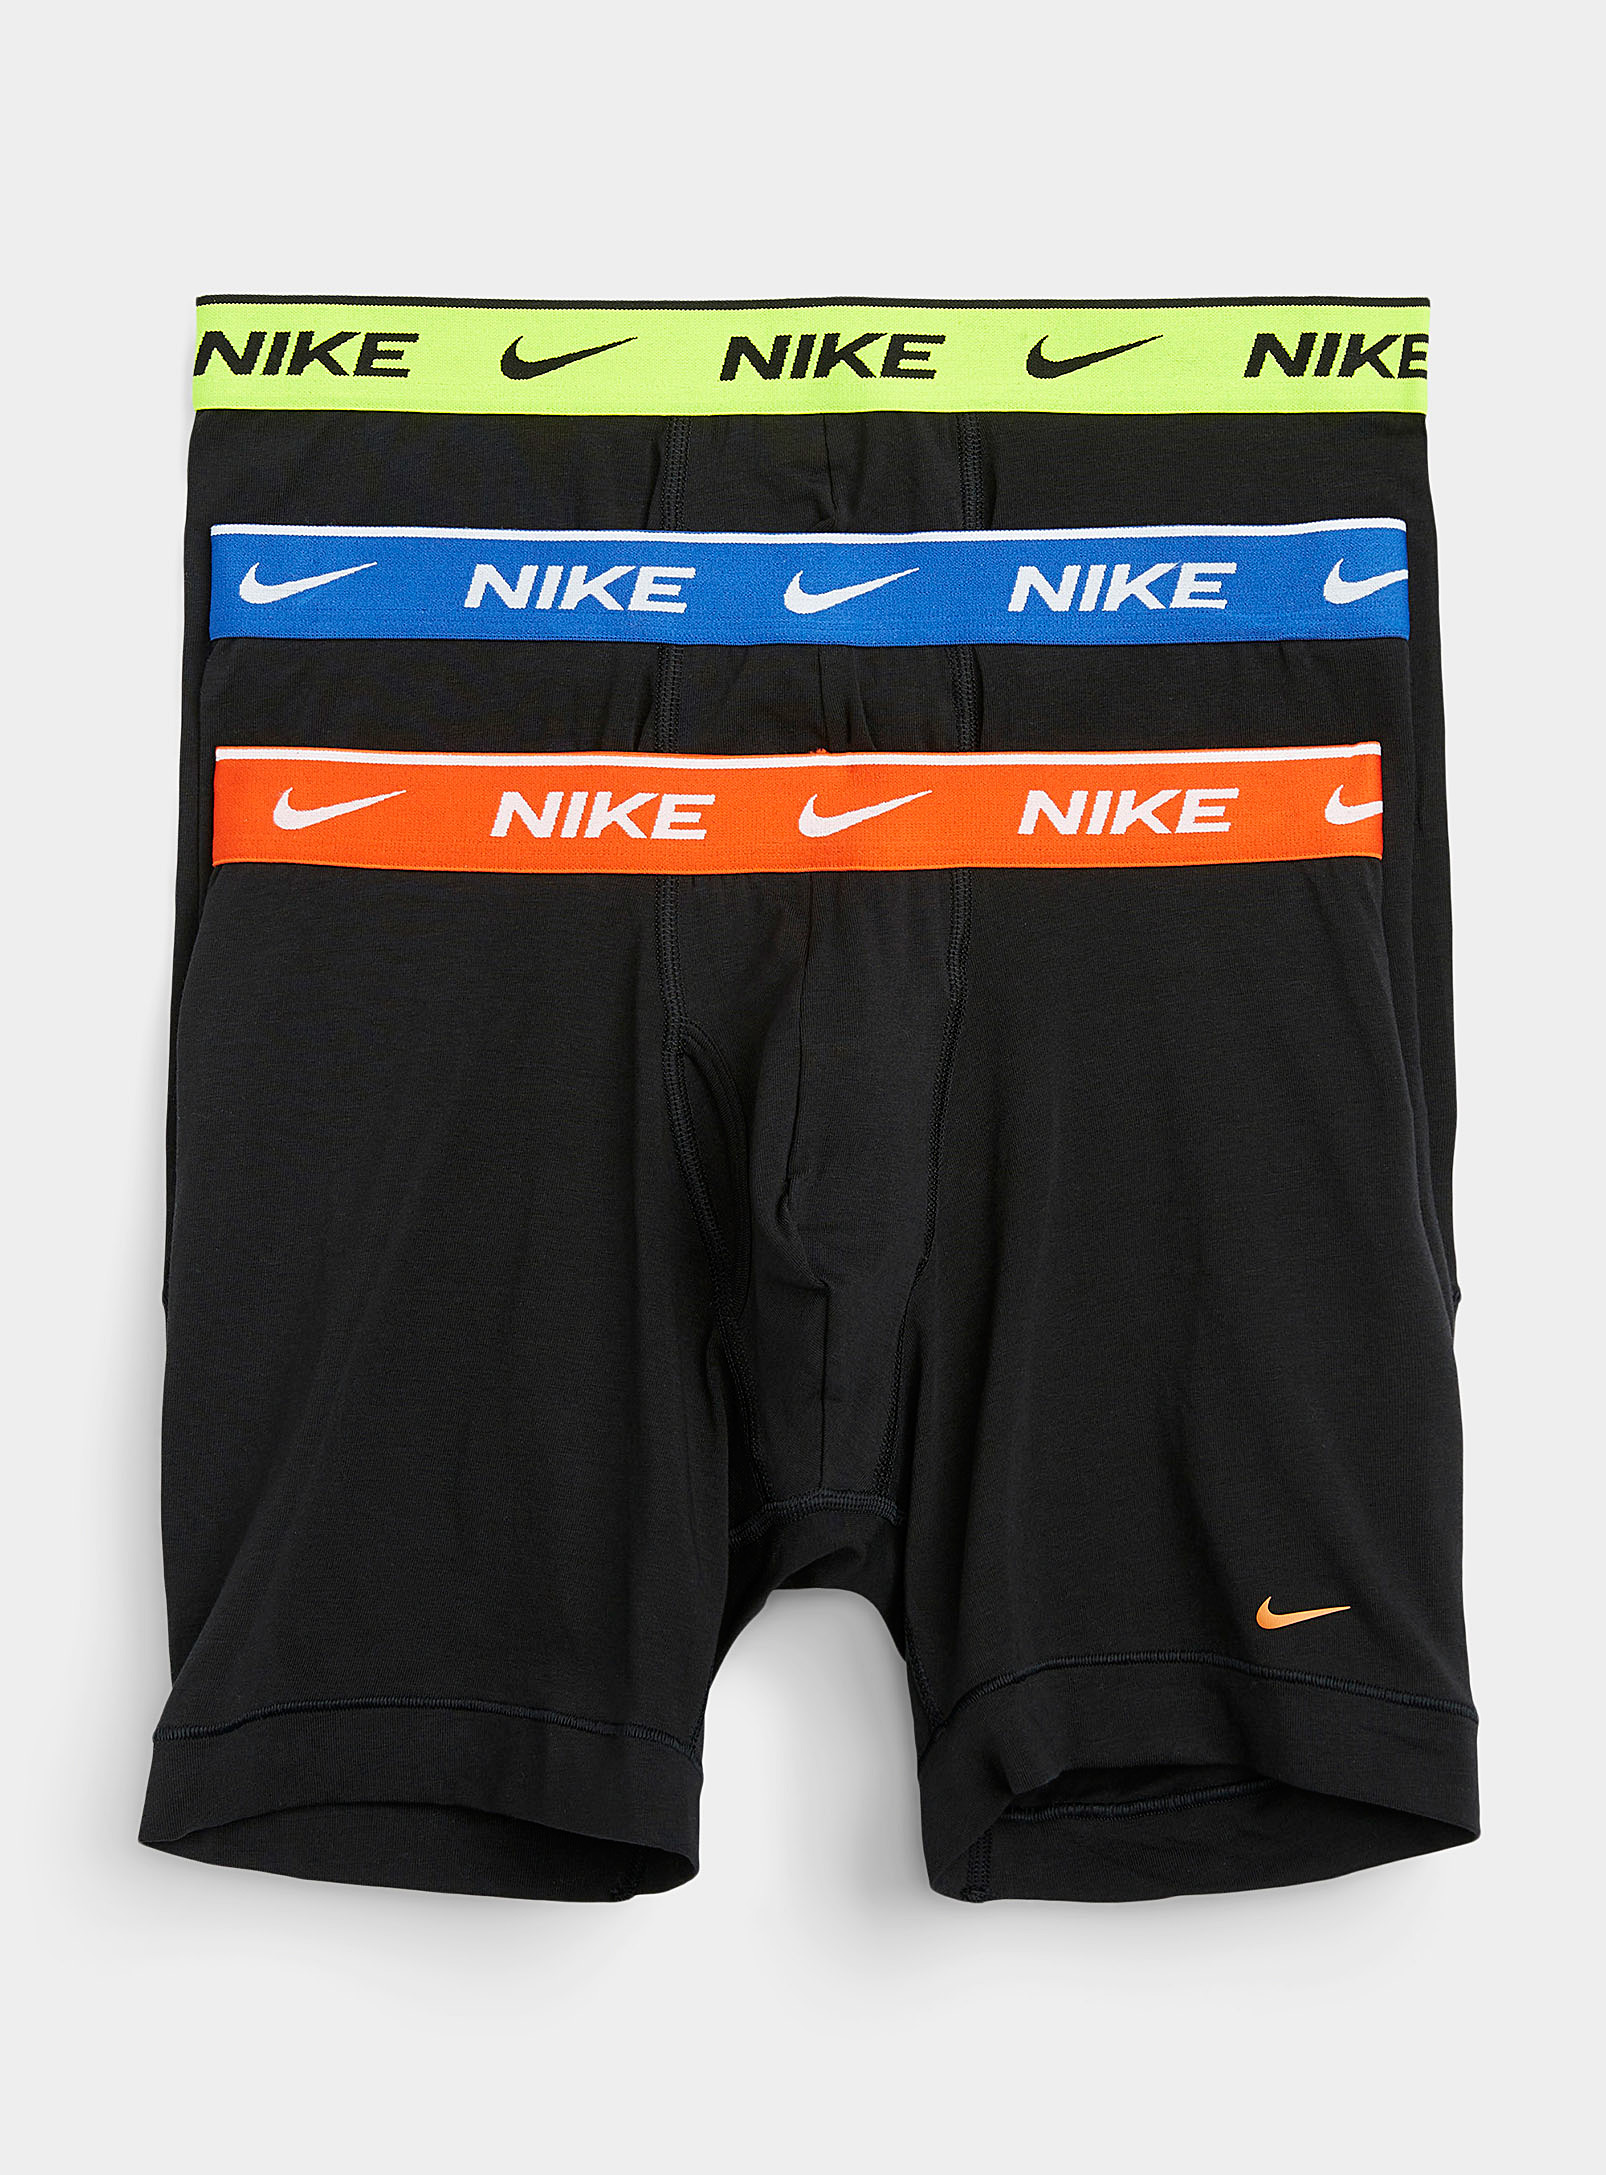 Nike Dri-fit Everyday Pop Band Boxer Briefs 3-pack In Patterned Black